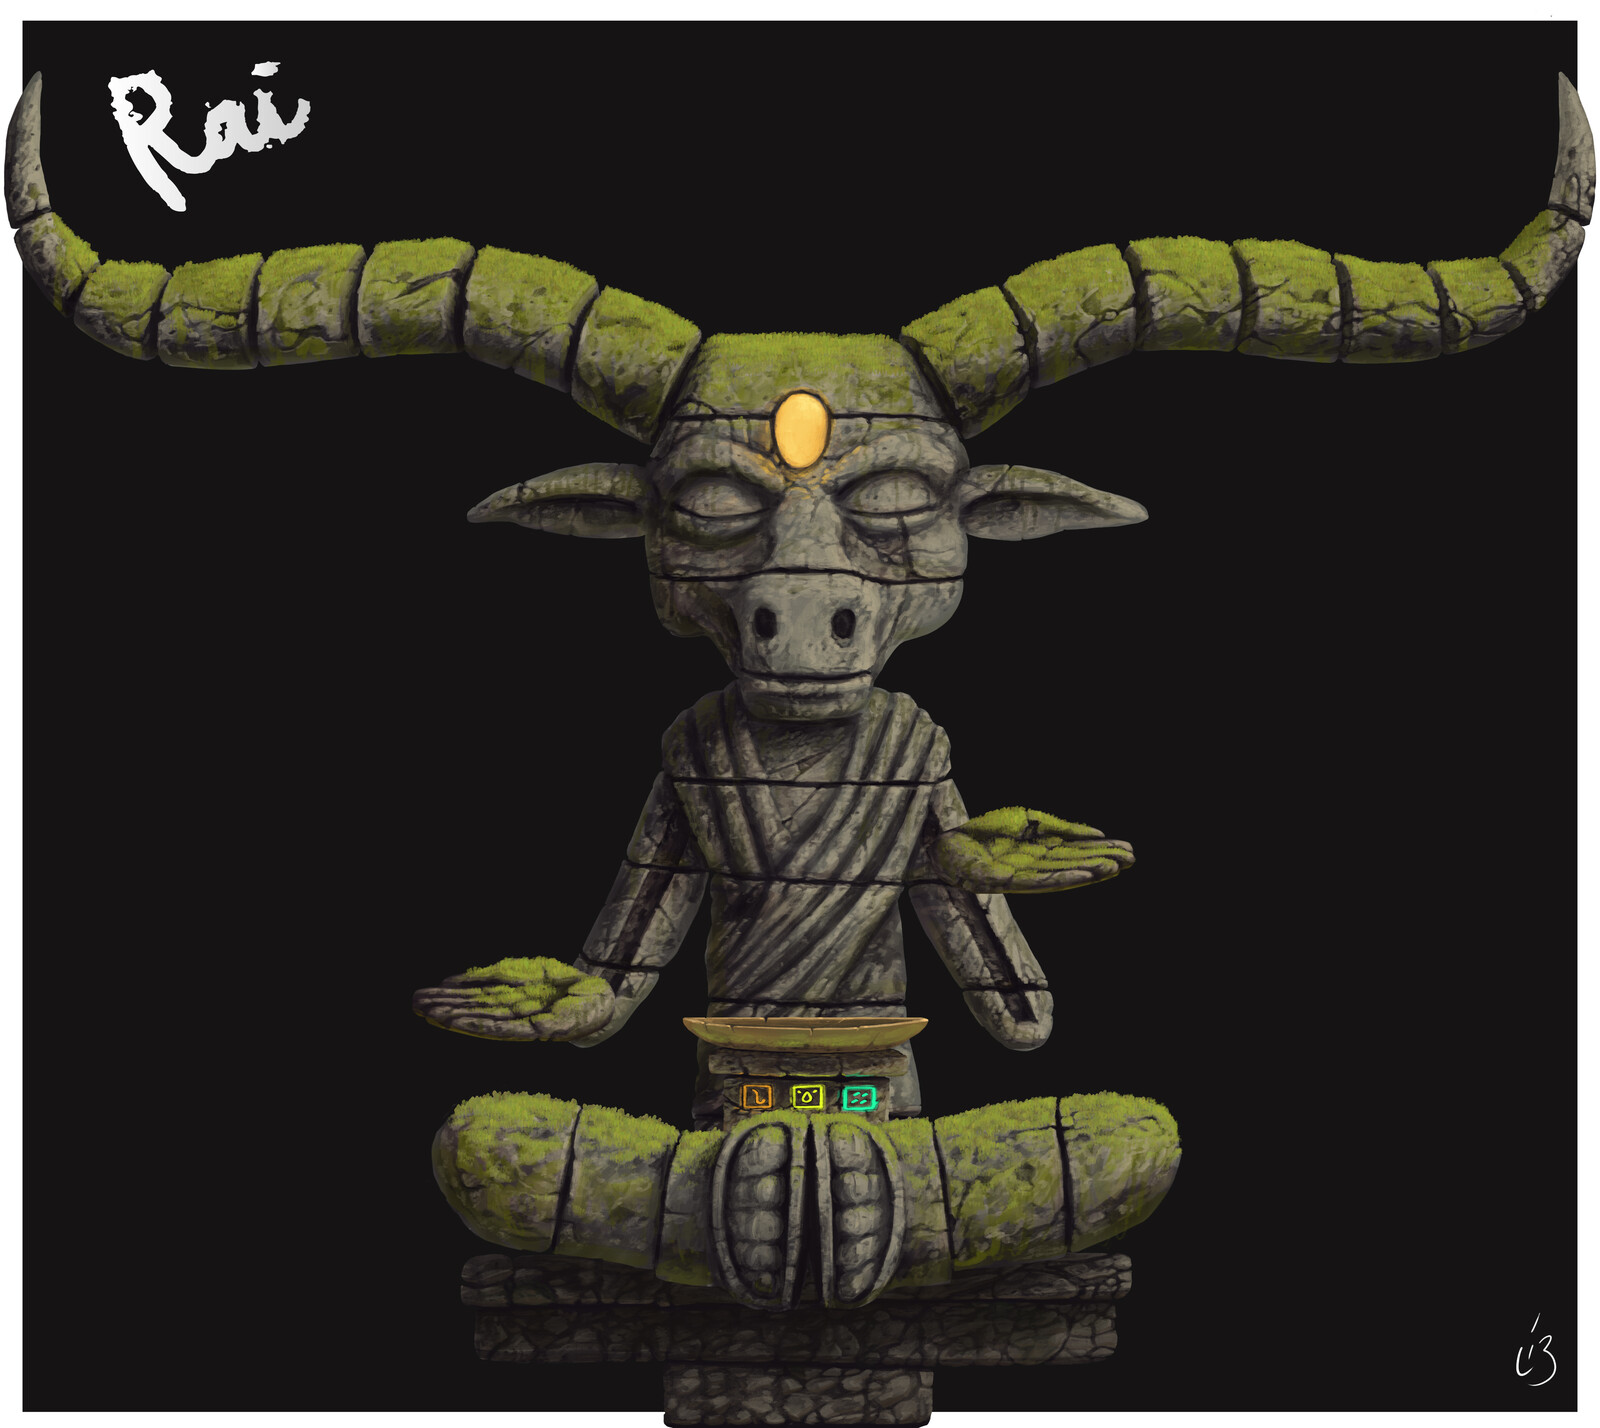 The Art of "Rai" (Videogame project)